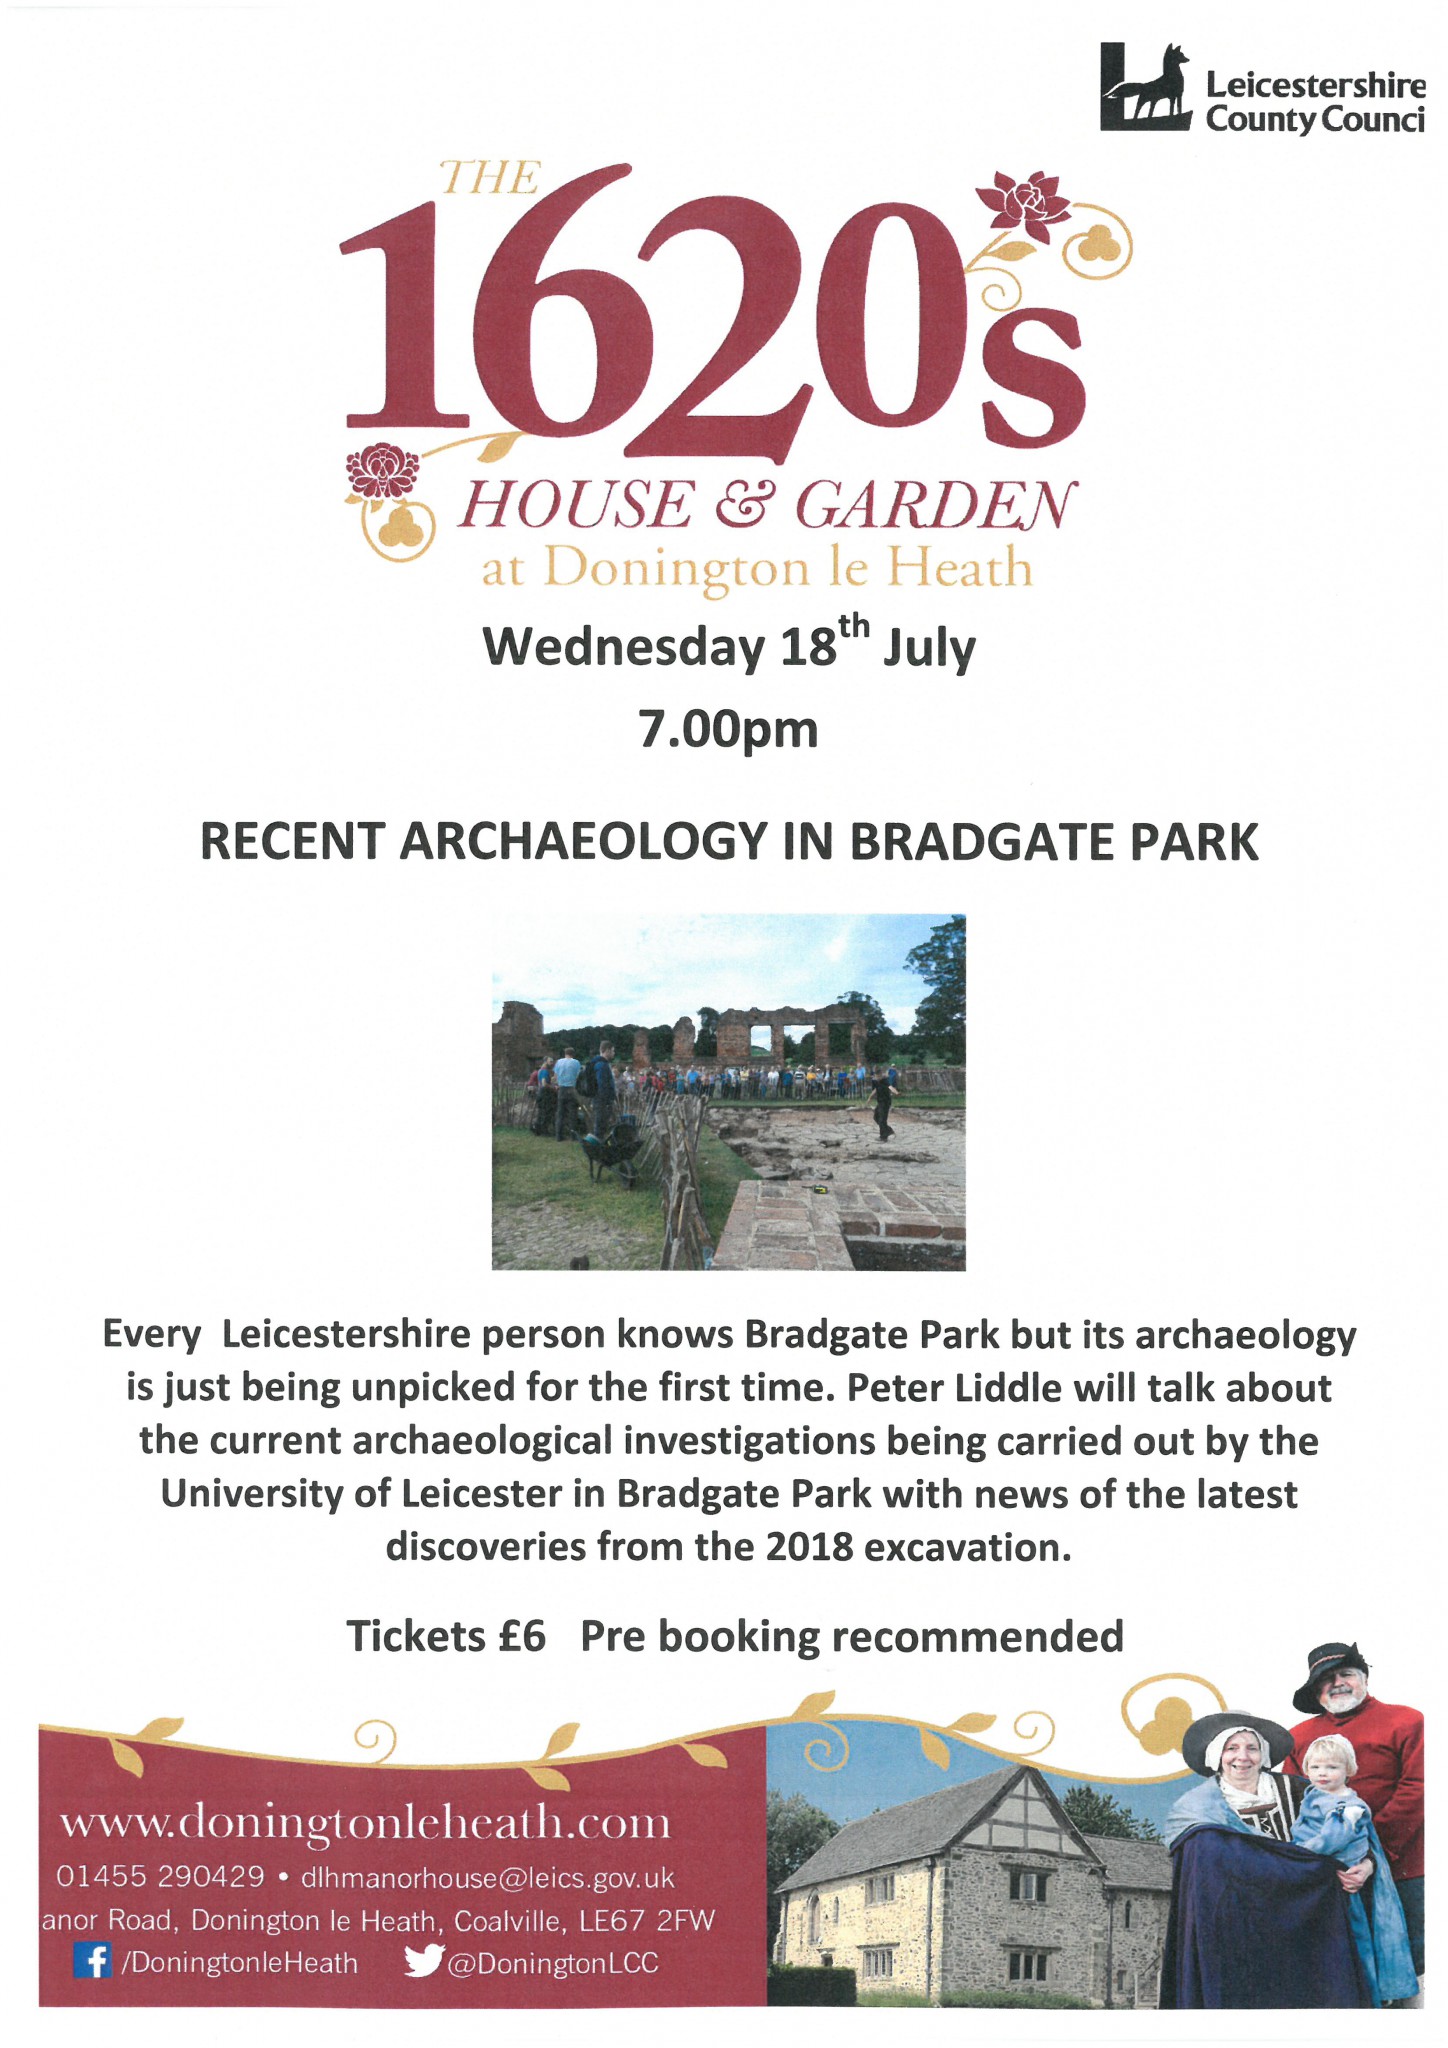 Festival of British Archaeology: The Recent Archaeology of Bradgate Park - SOLD OUT